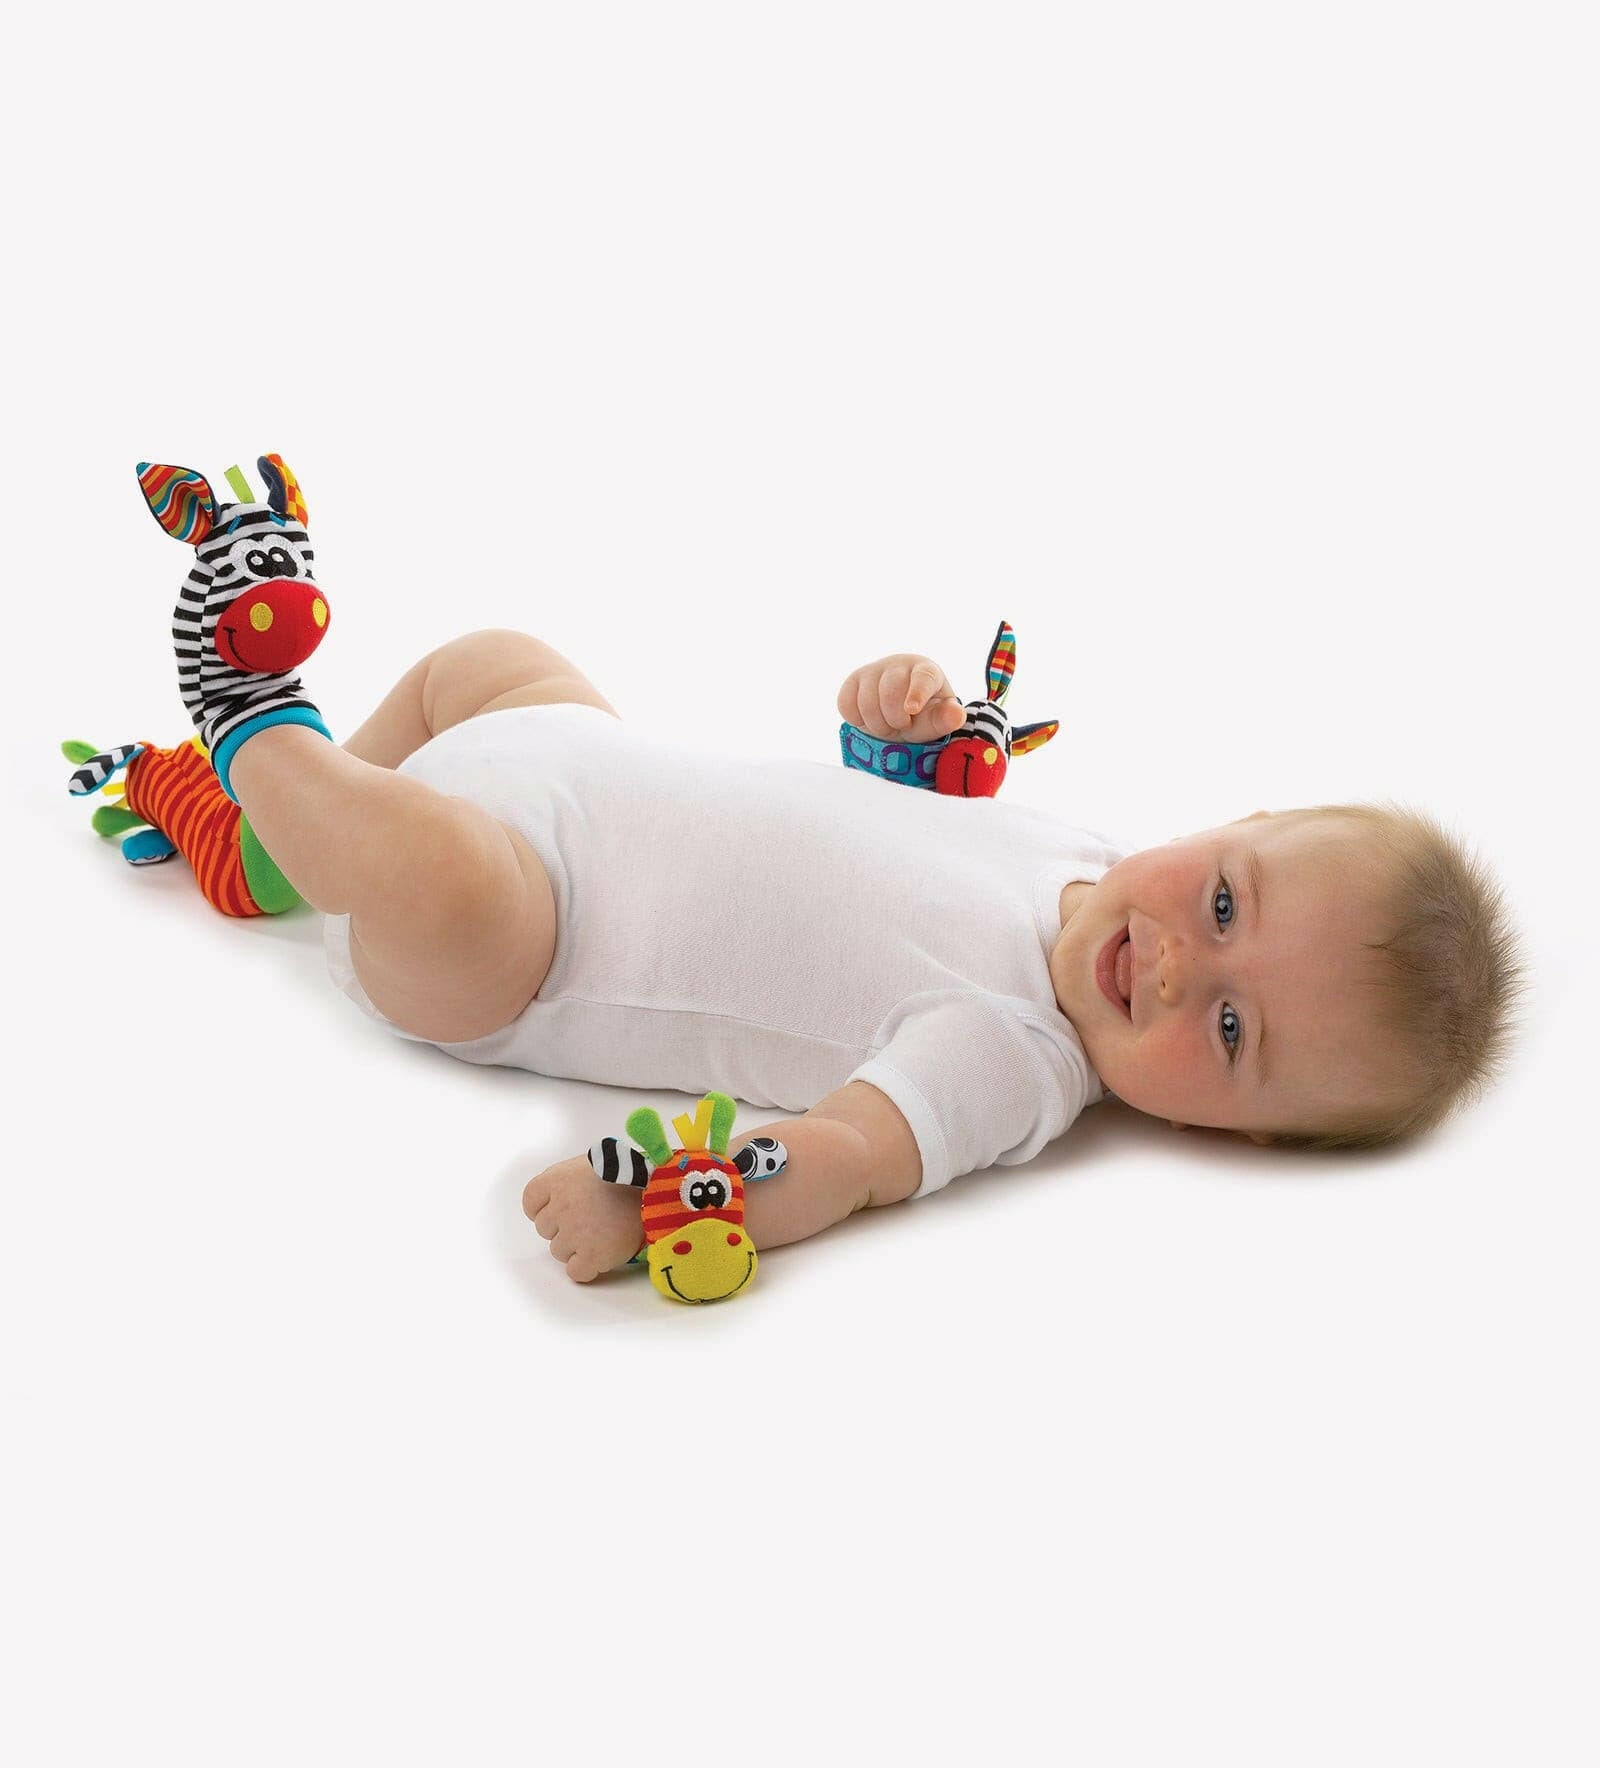 Jungle Wrist Rattle and Foot Finder by Playgro.